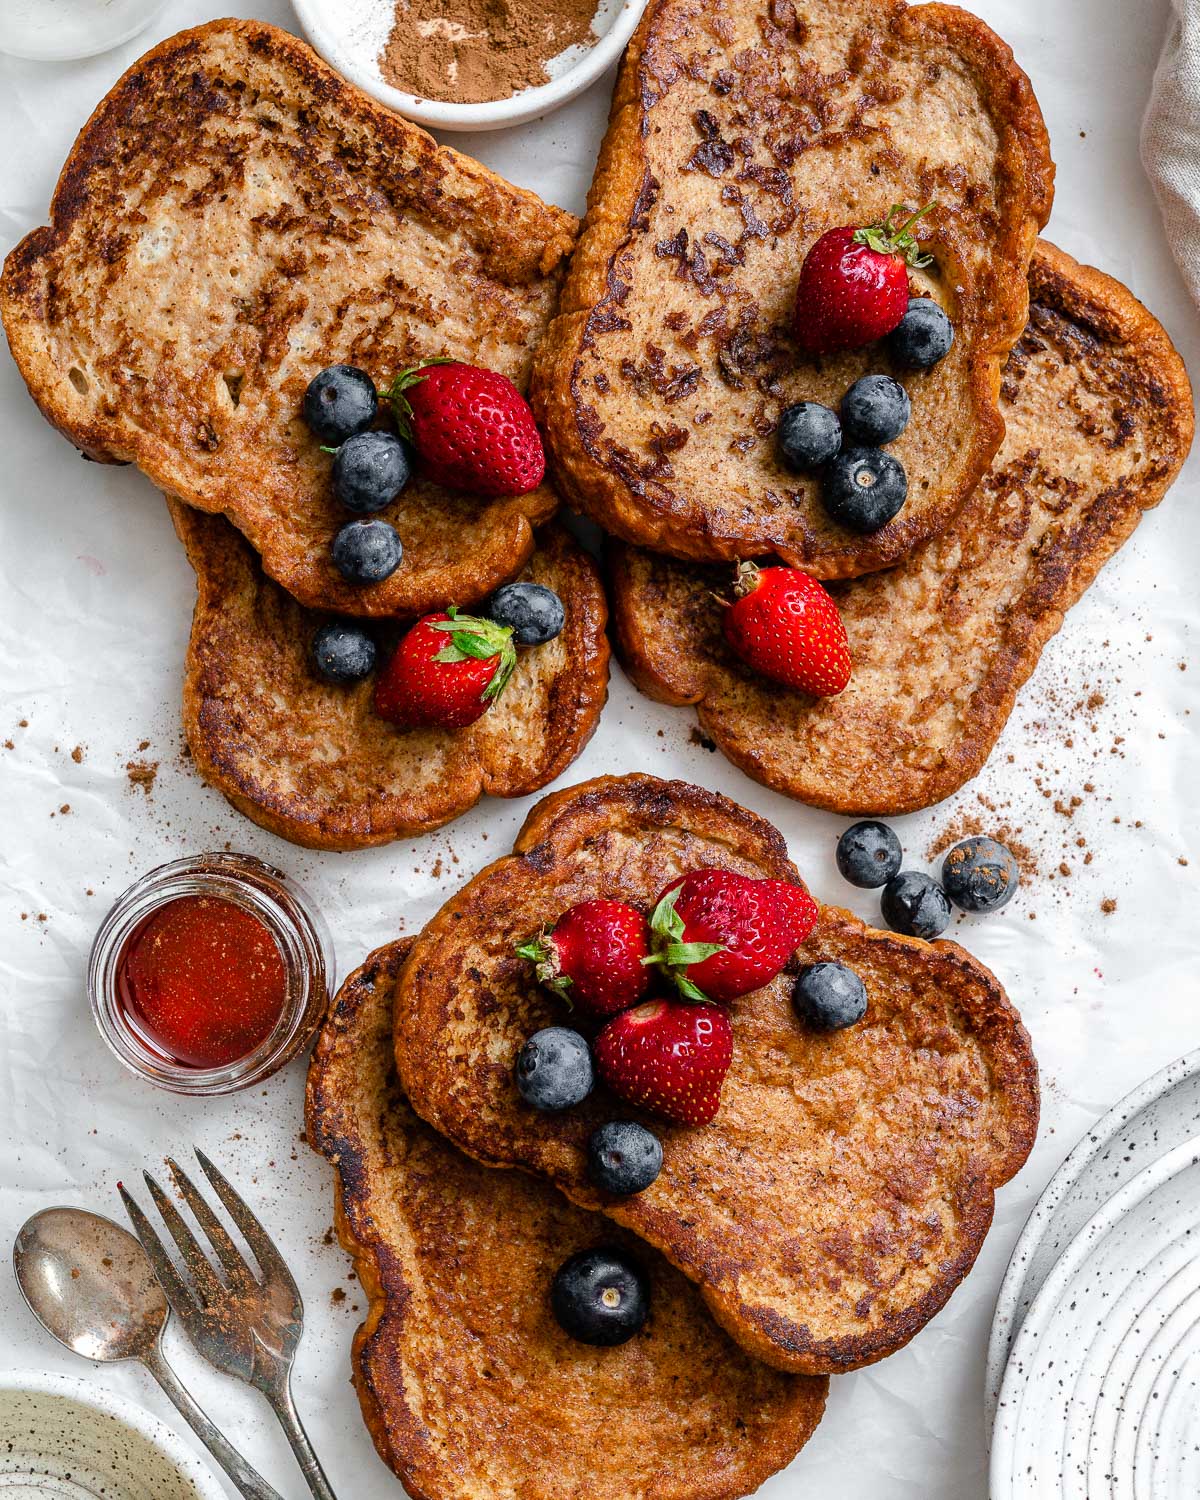 several completed just egg french toast with berries on top against a white surface